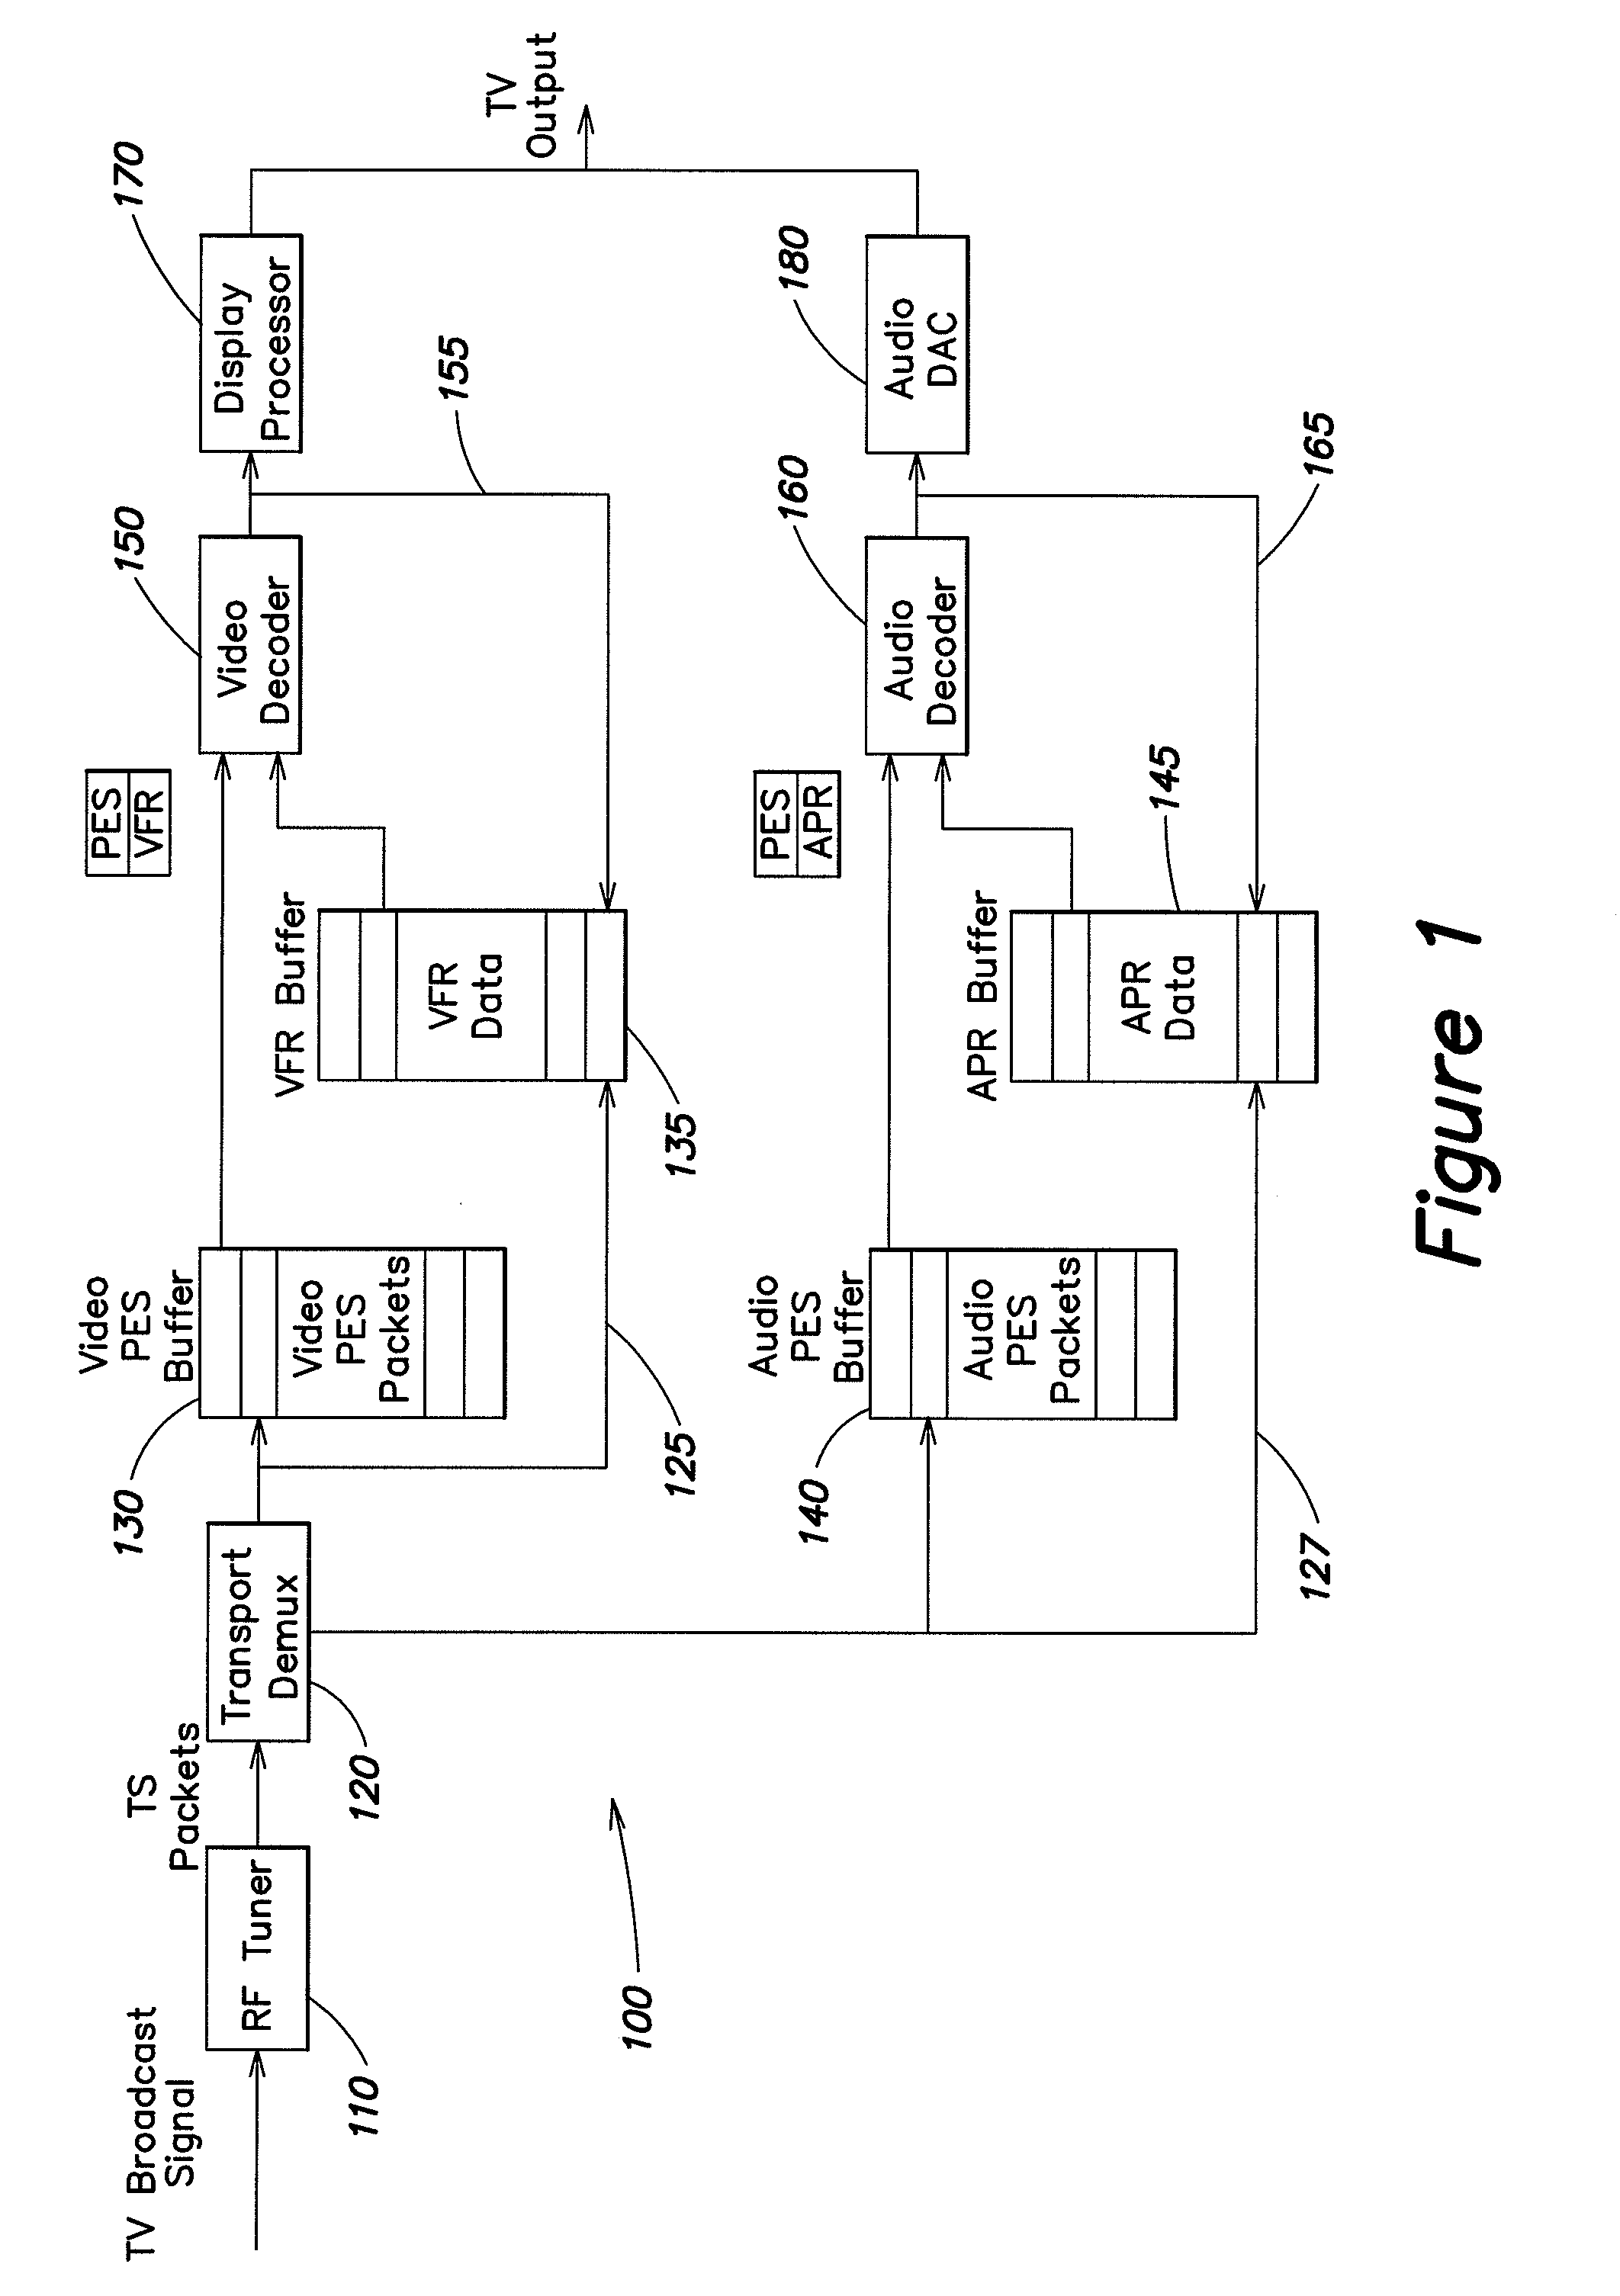 System and method for efficient video and audio instant replay for digital television